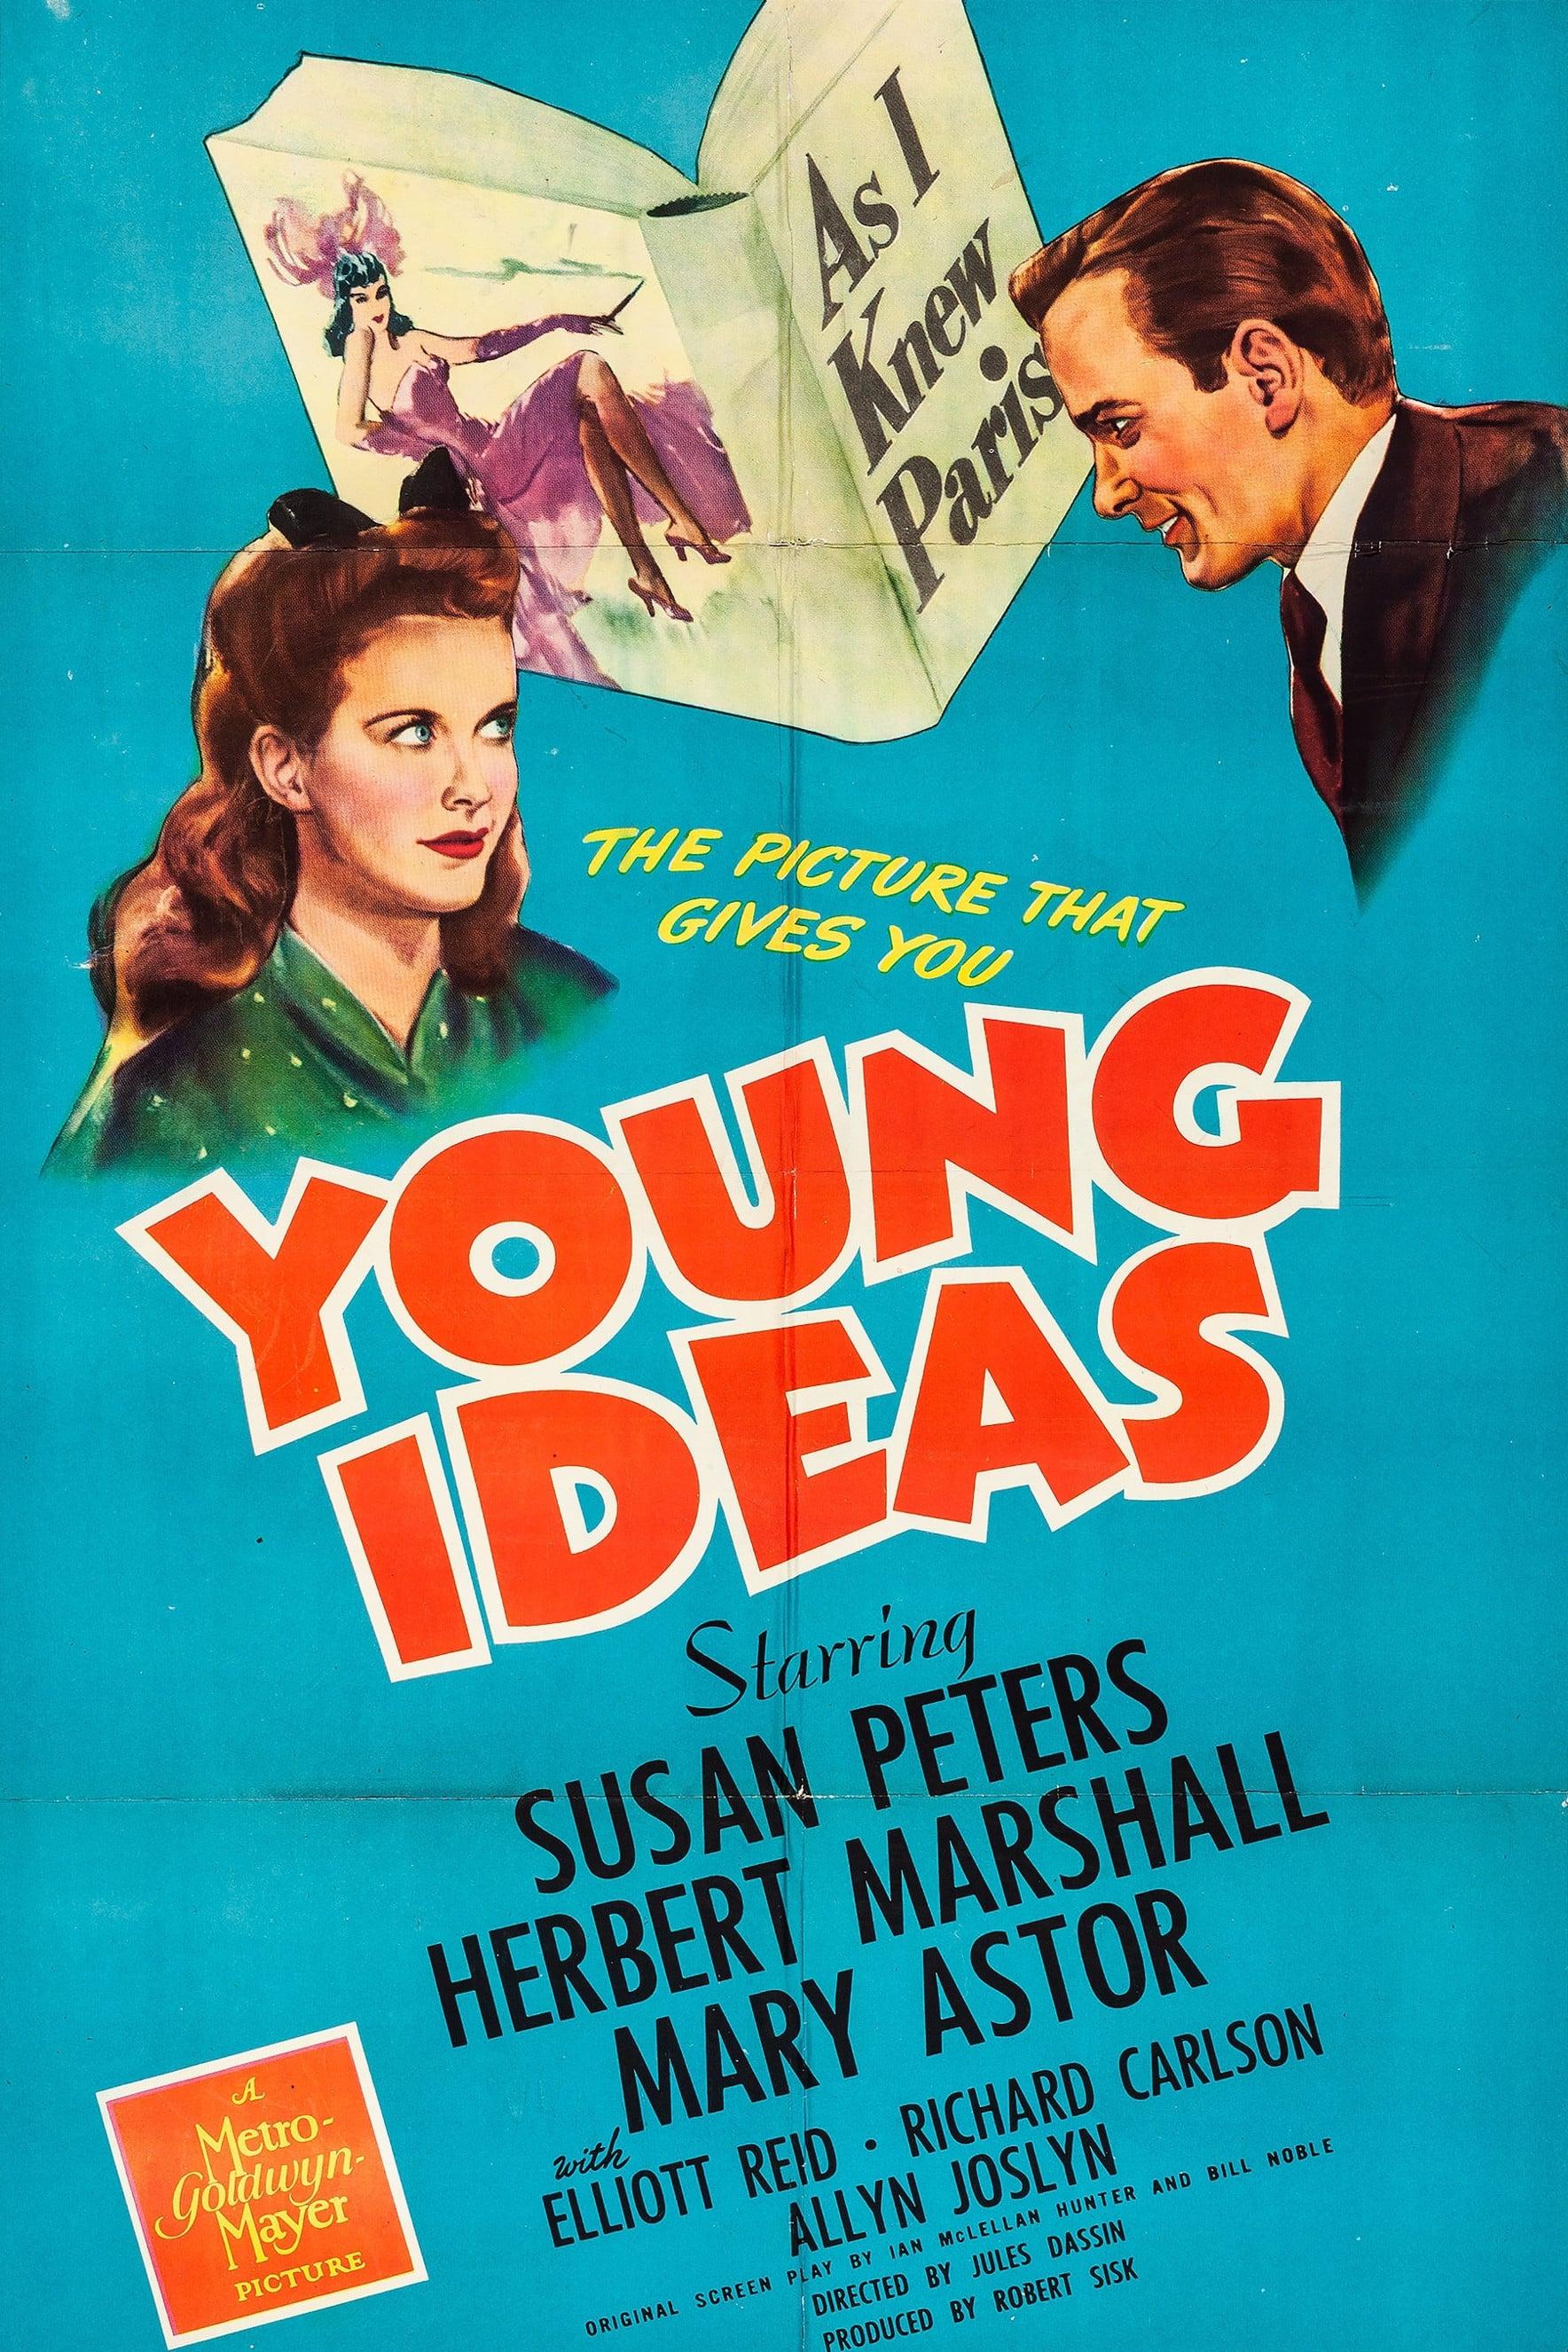 Young Ideas poster